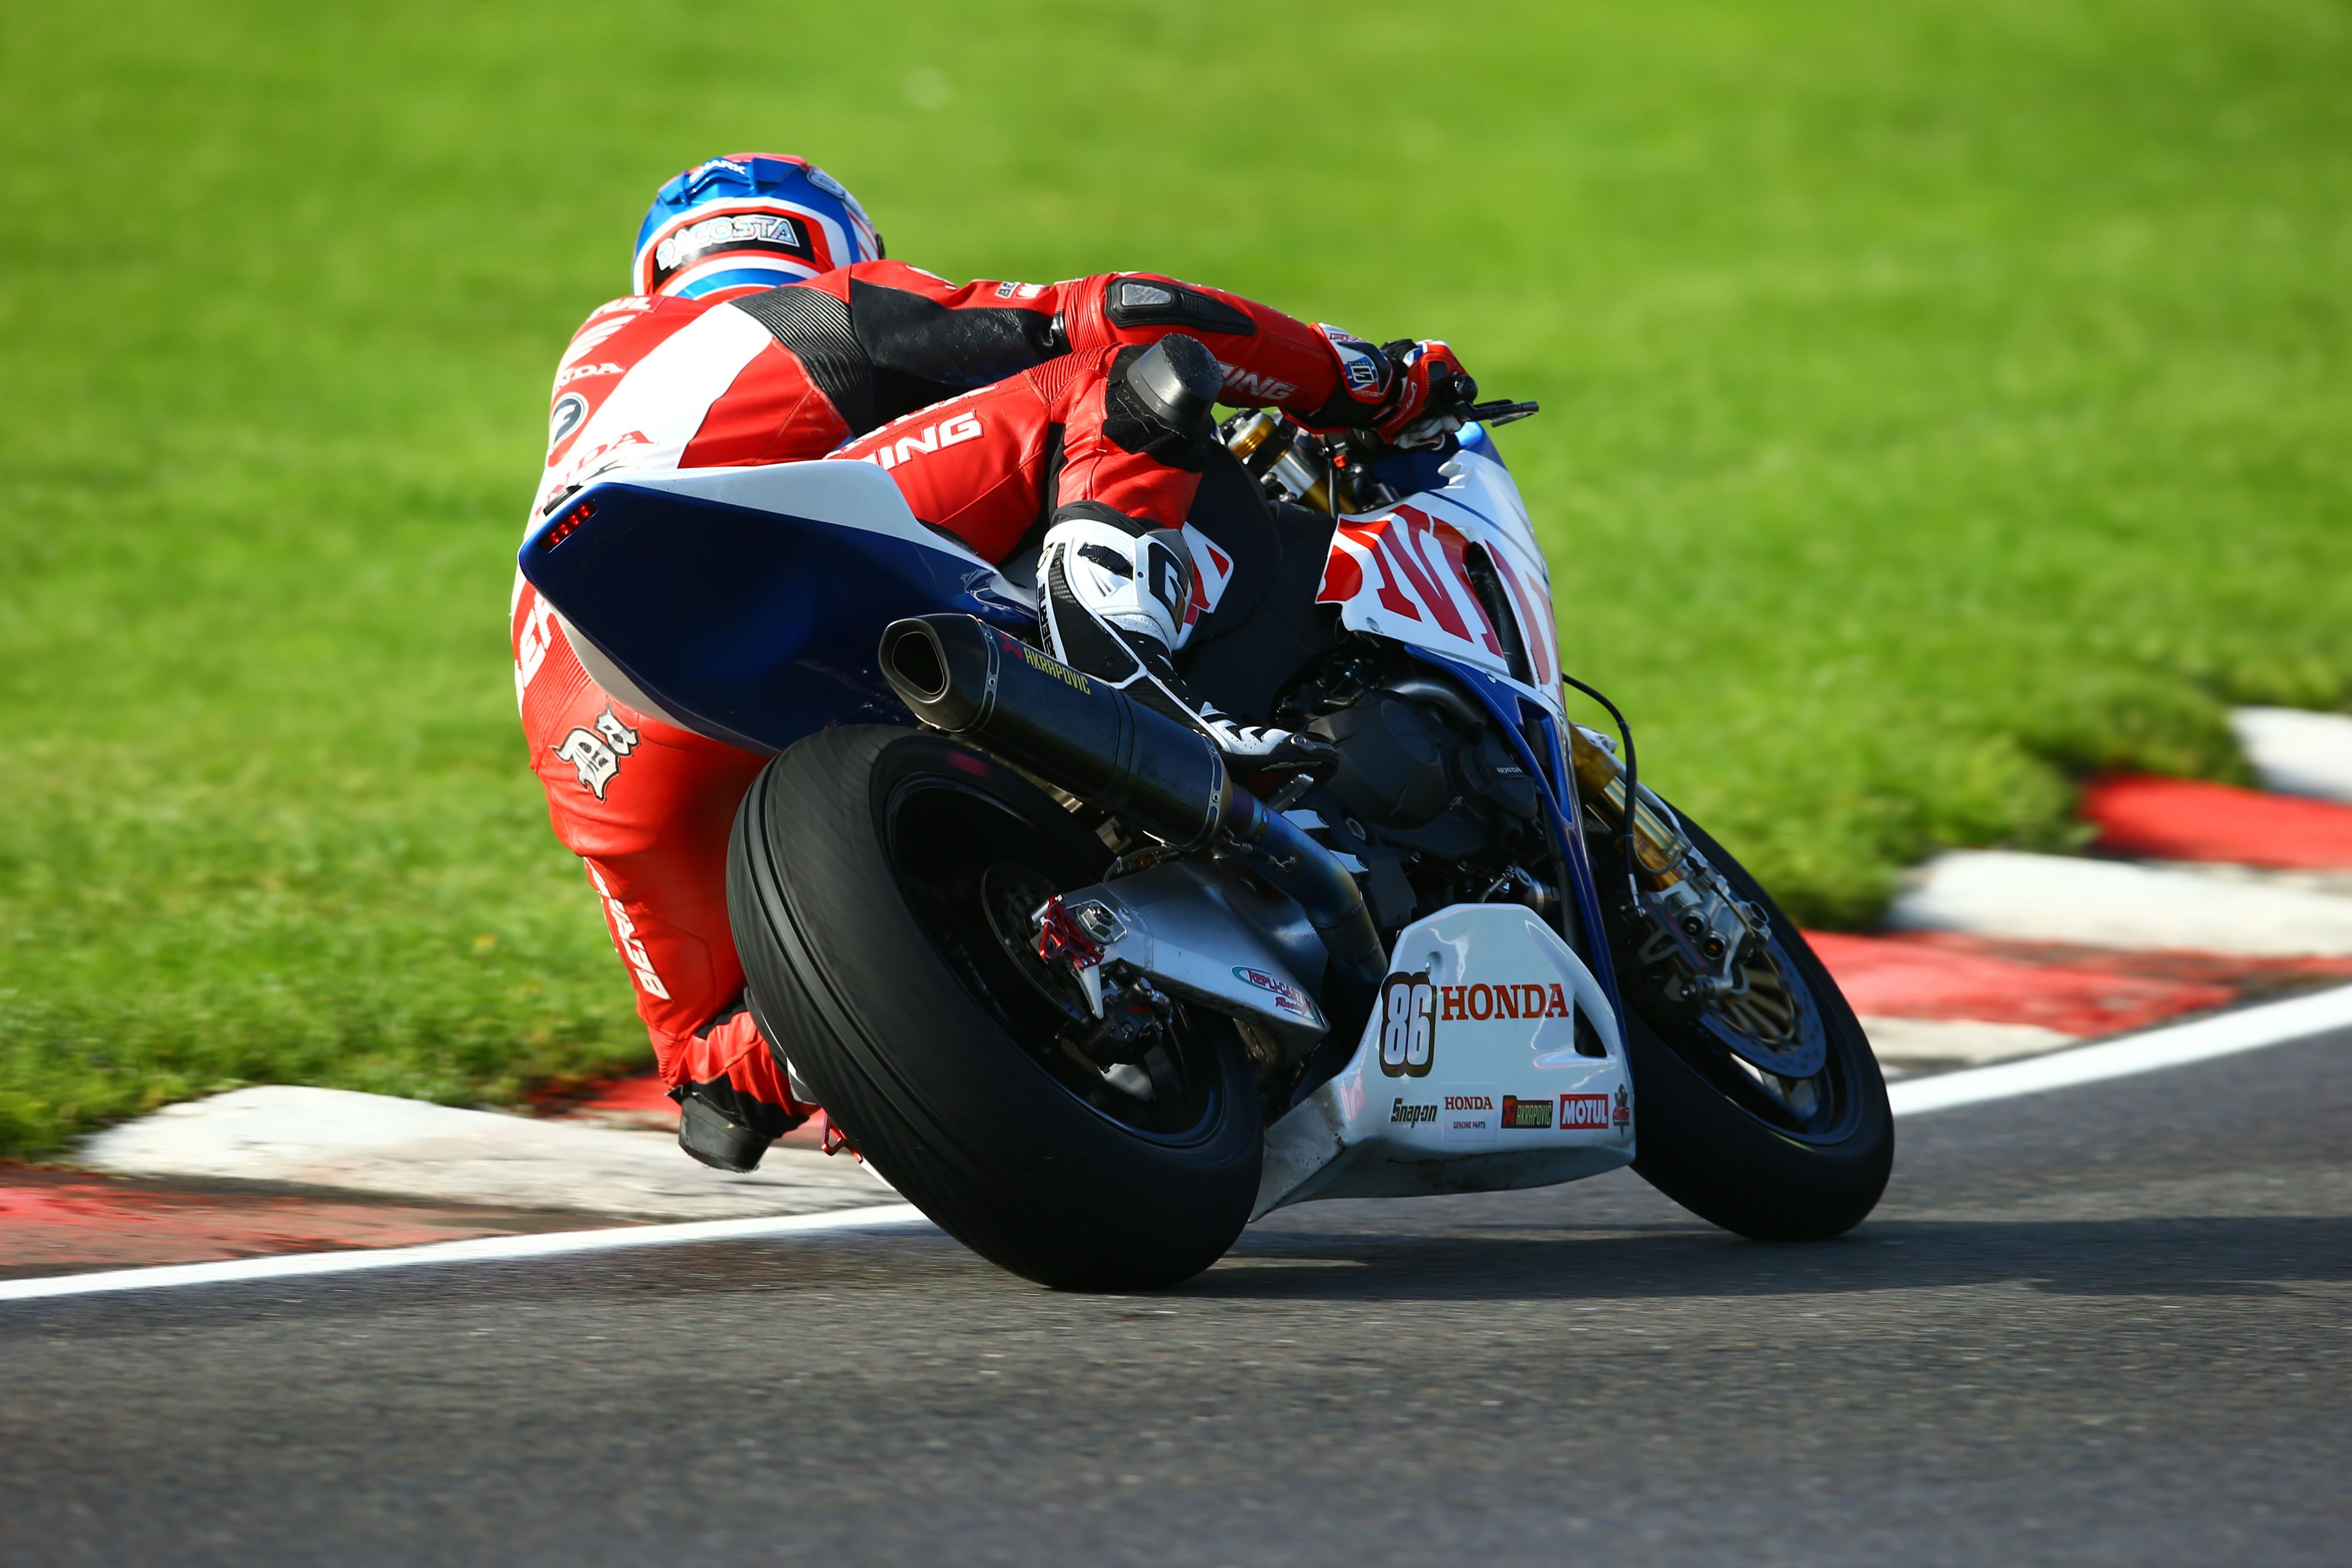 Honda Fireblade designed by Conor Cummins to race at BSB final